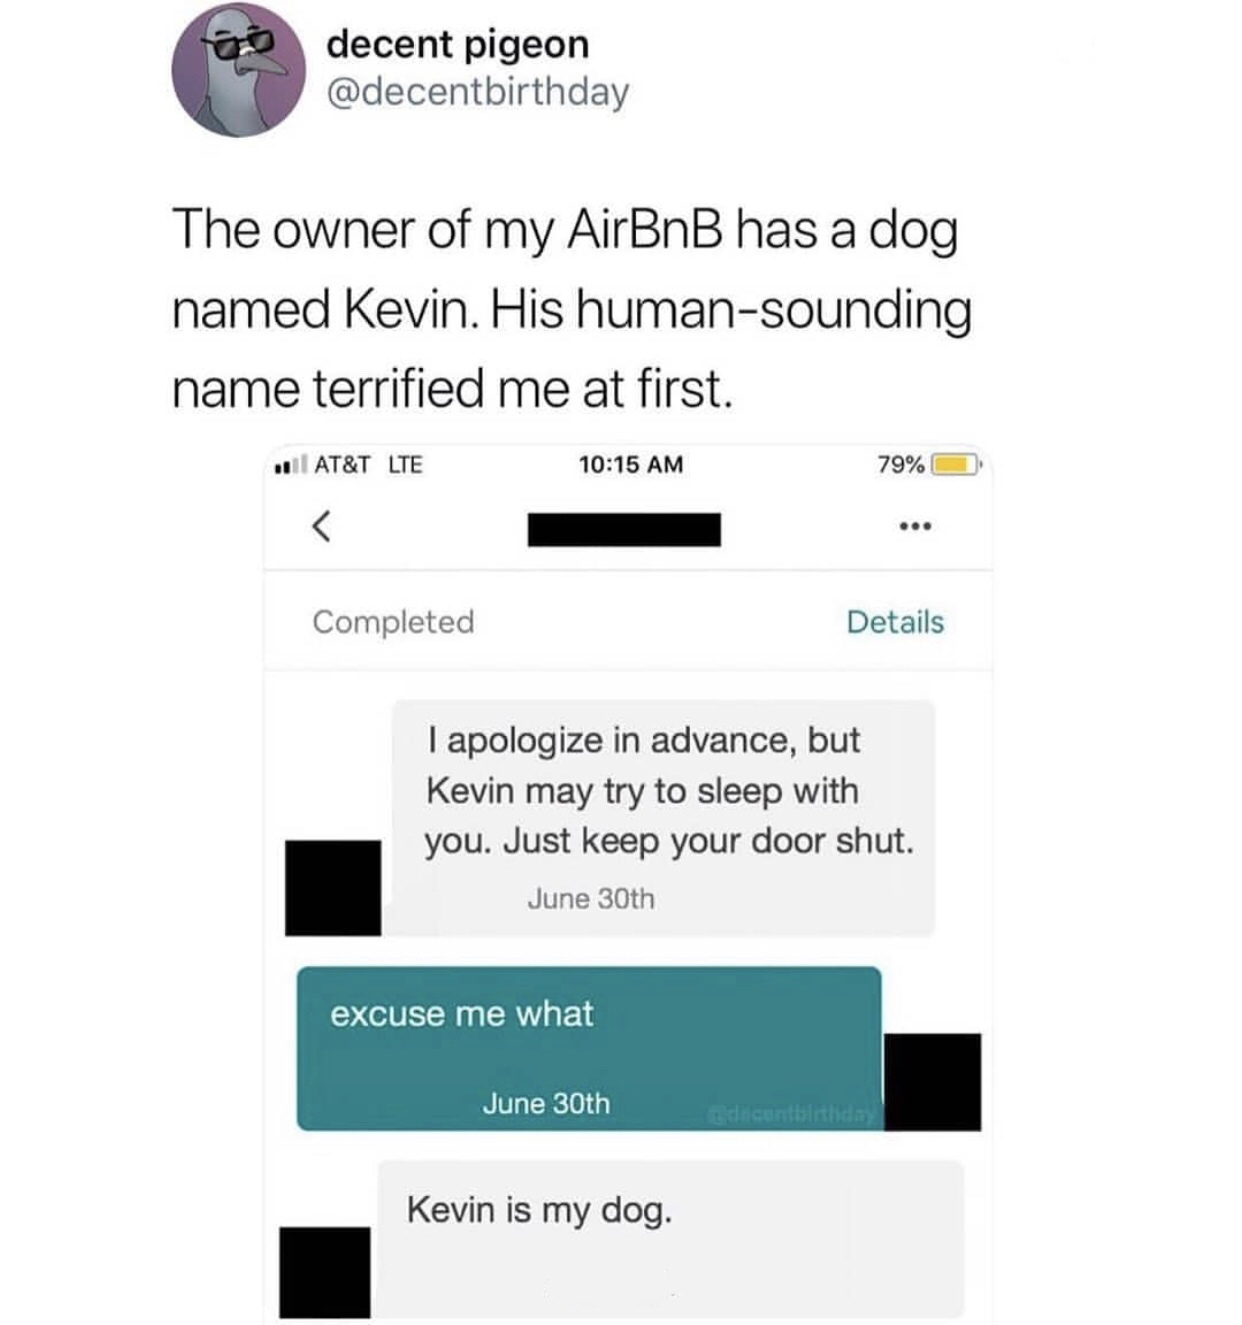 web page - decent pigeon The owner of my AirBnB has a dog named Kevin. His humansounding name terrified me at first. . At&T Lte 79% O Completed Details I apologize in advance, but Kevin may try to sleep with you. Just keep your door shut. June 30th excuse